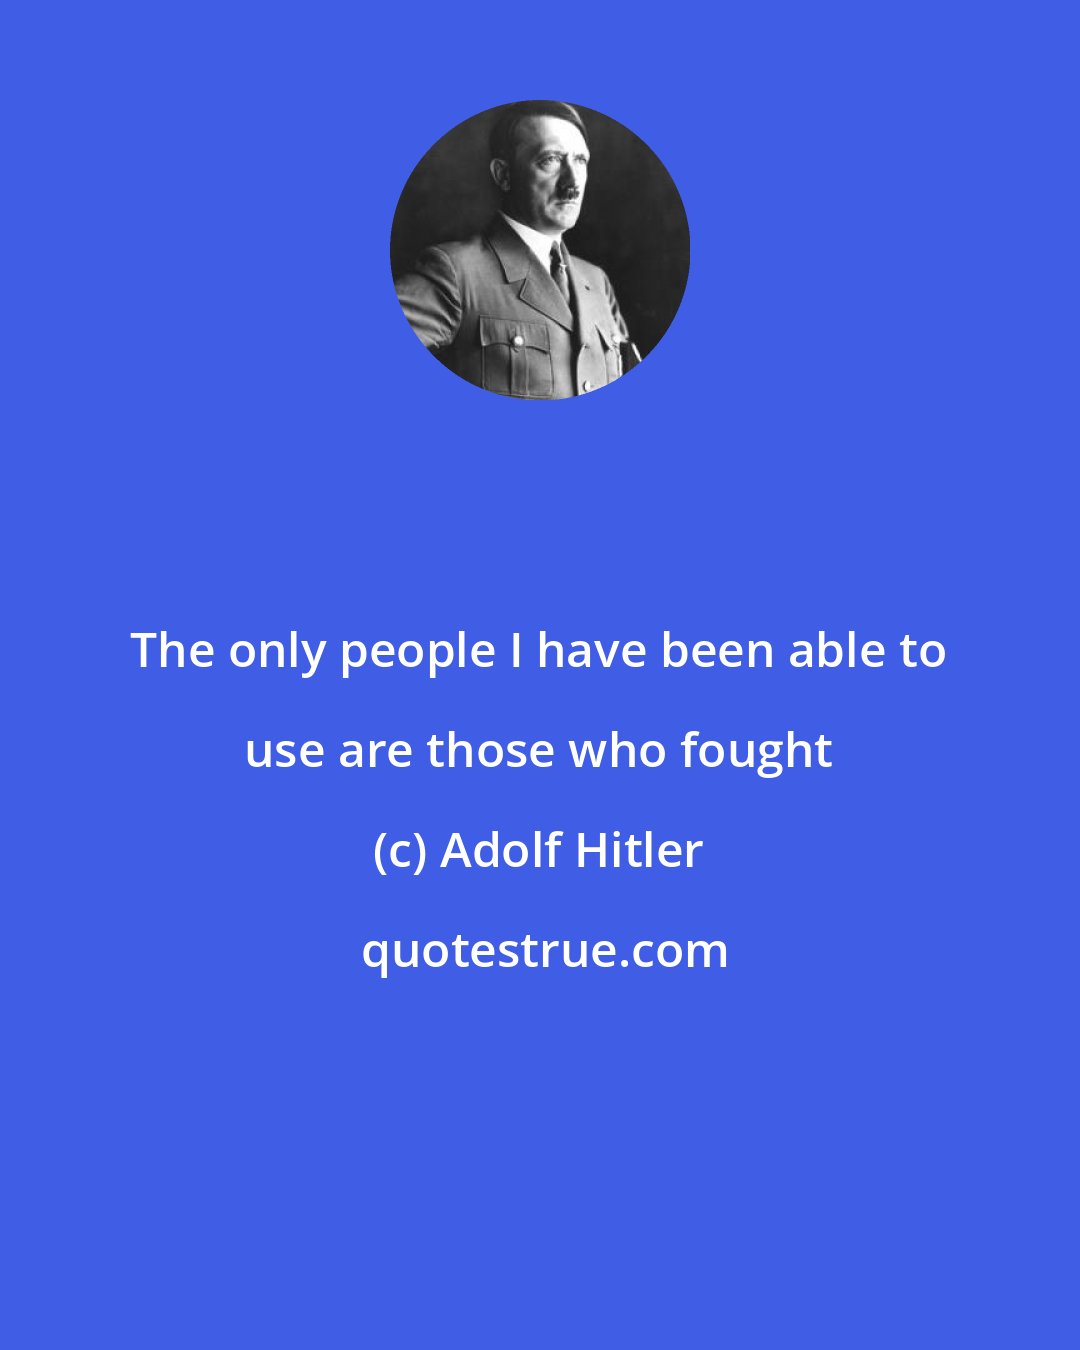 Adolf Hitler: The only people I have been able to use are those who fought